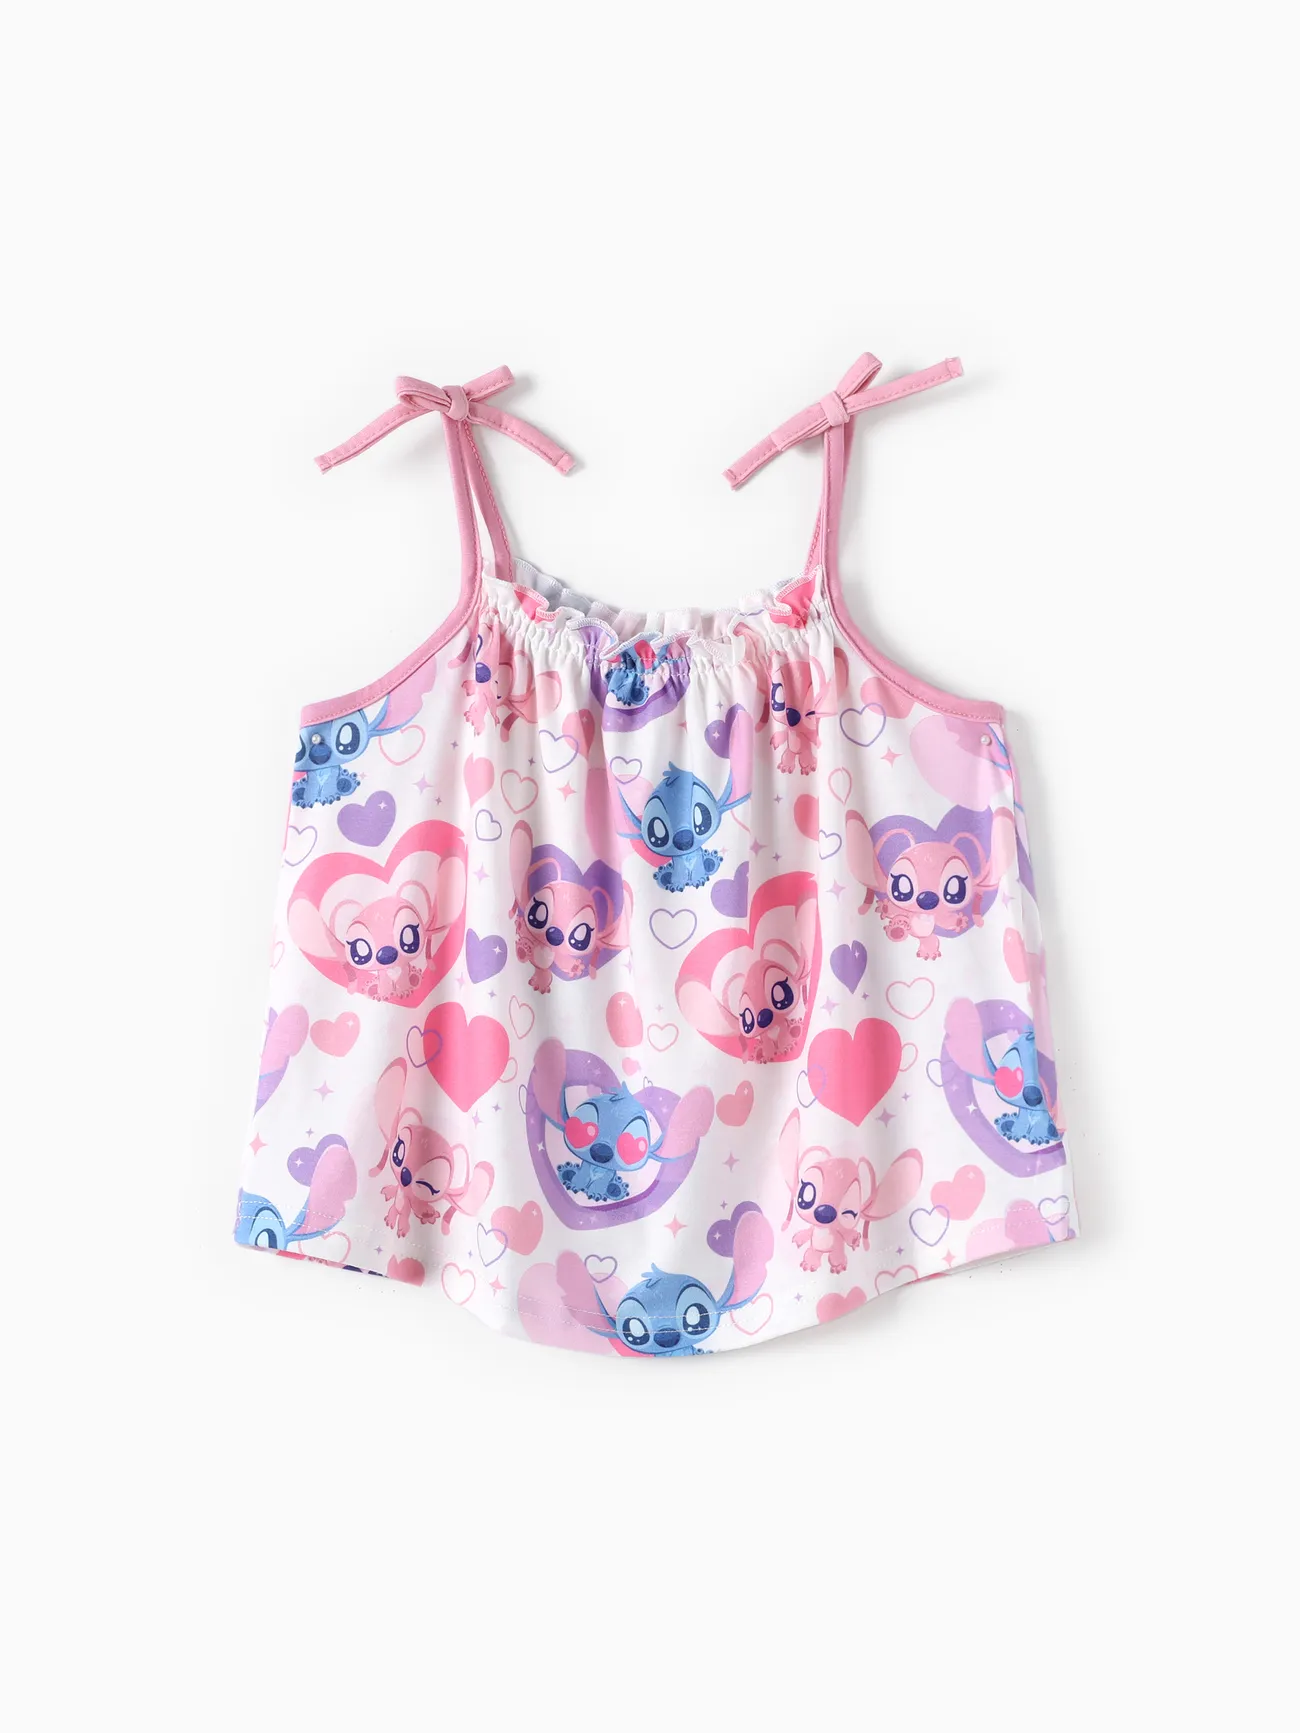 Disney Stitch Toddler Girls 2pcs Naia™ Lovely Stitch Heart/Palm Leaf Print Shoulder Straps with Bows Top with Shorts Set Pink big image 1